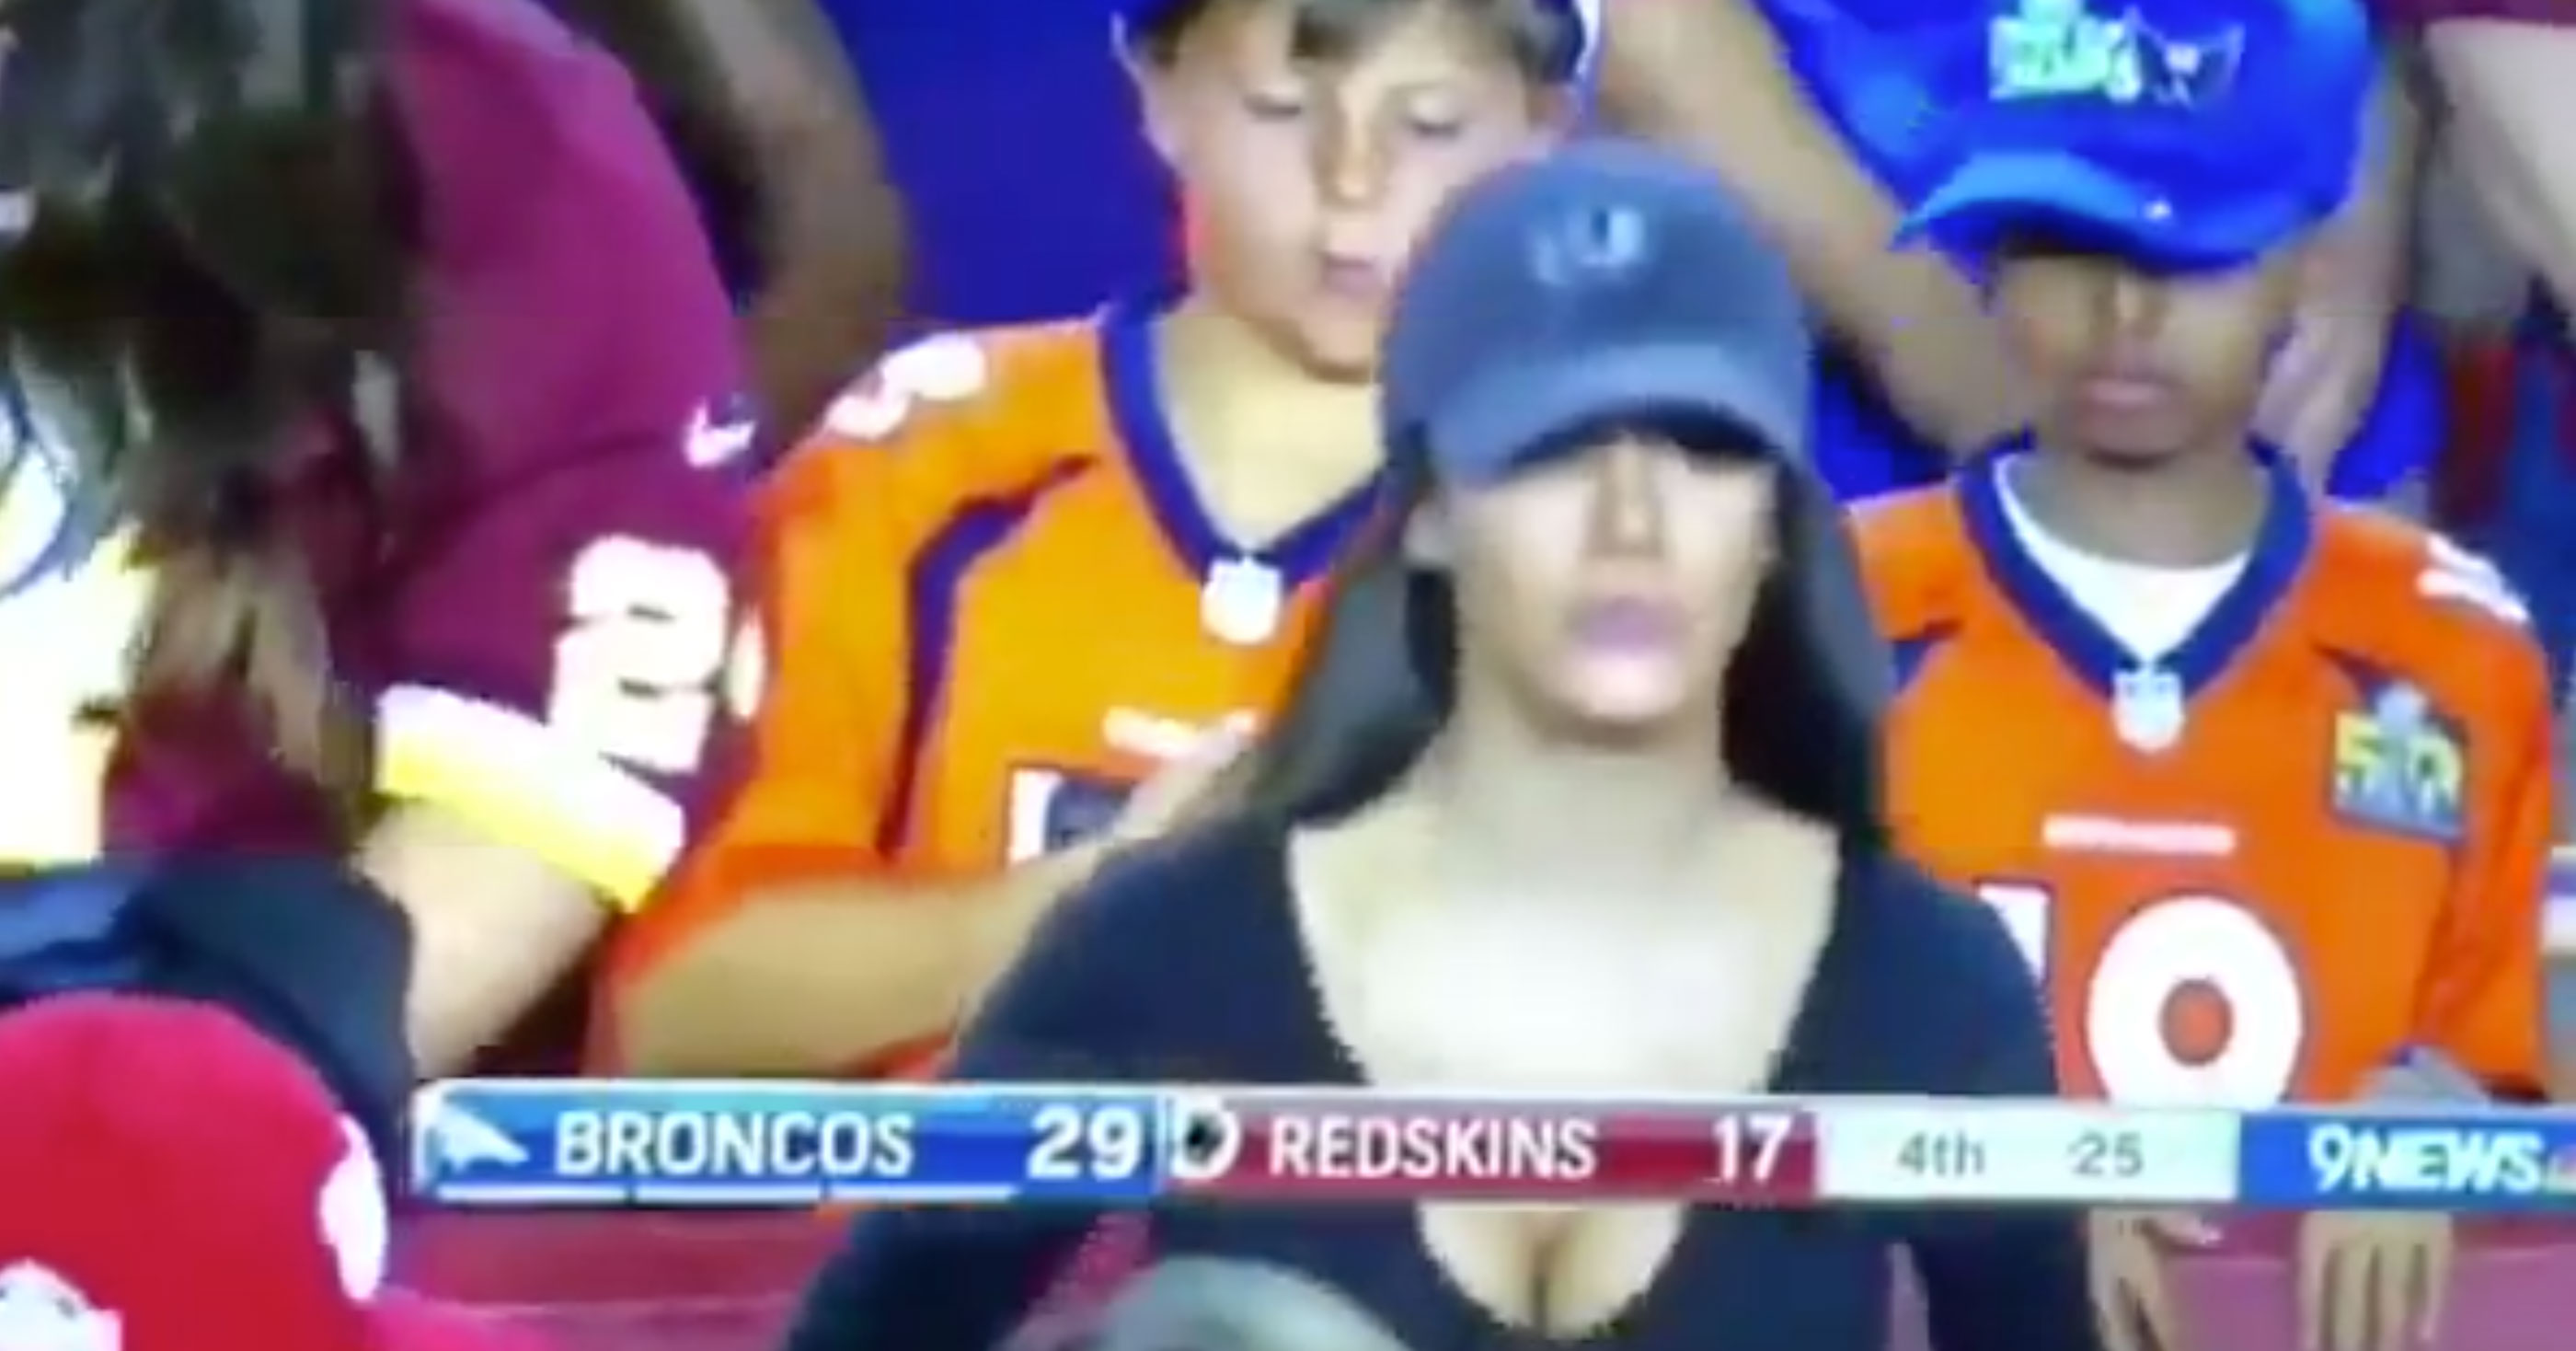 Smoking Hot Fan Mesmerizes Two Young Kids At Redskins-Broncos Game (VIDEO)2800 x 1468